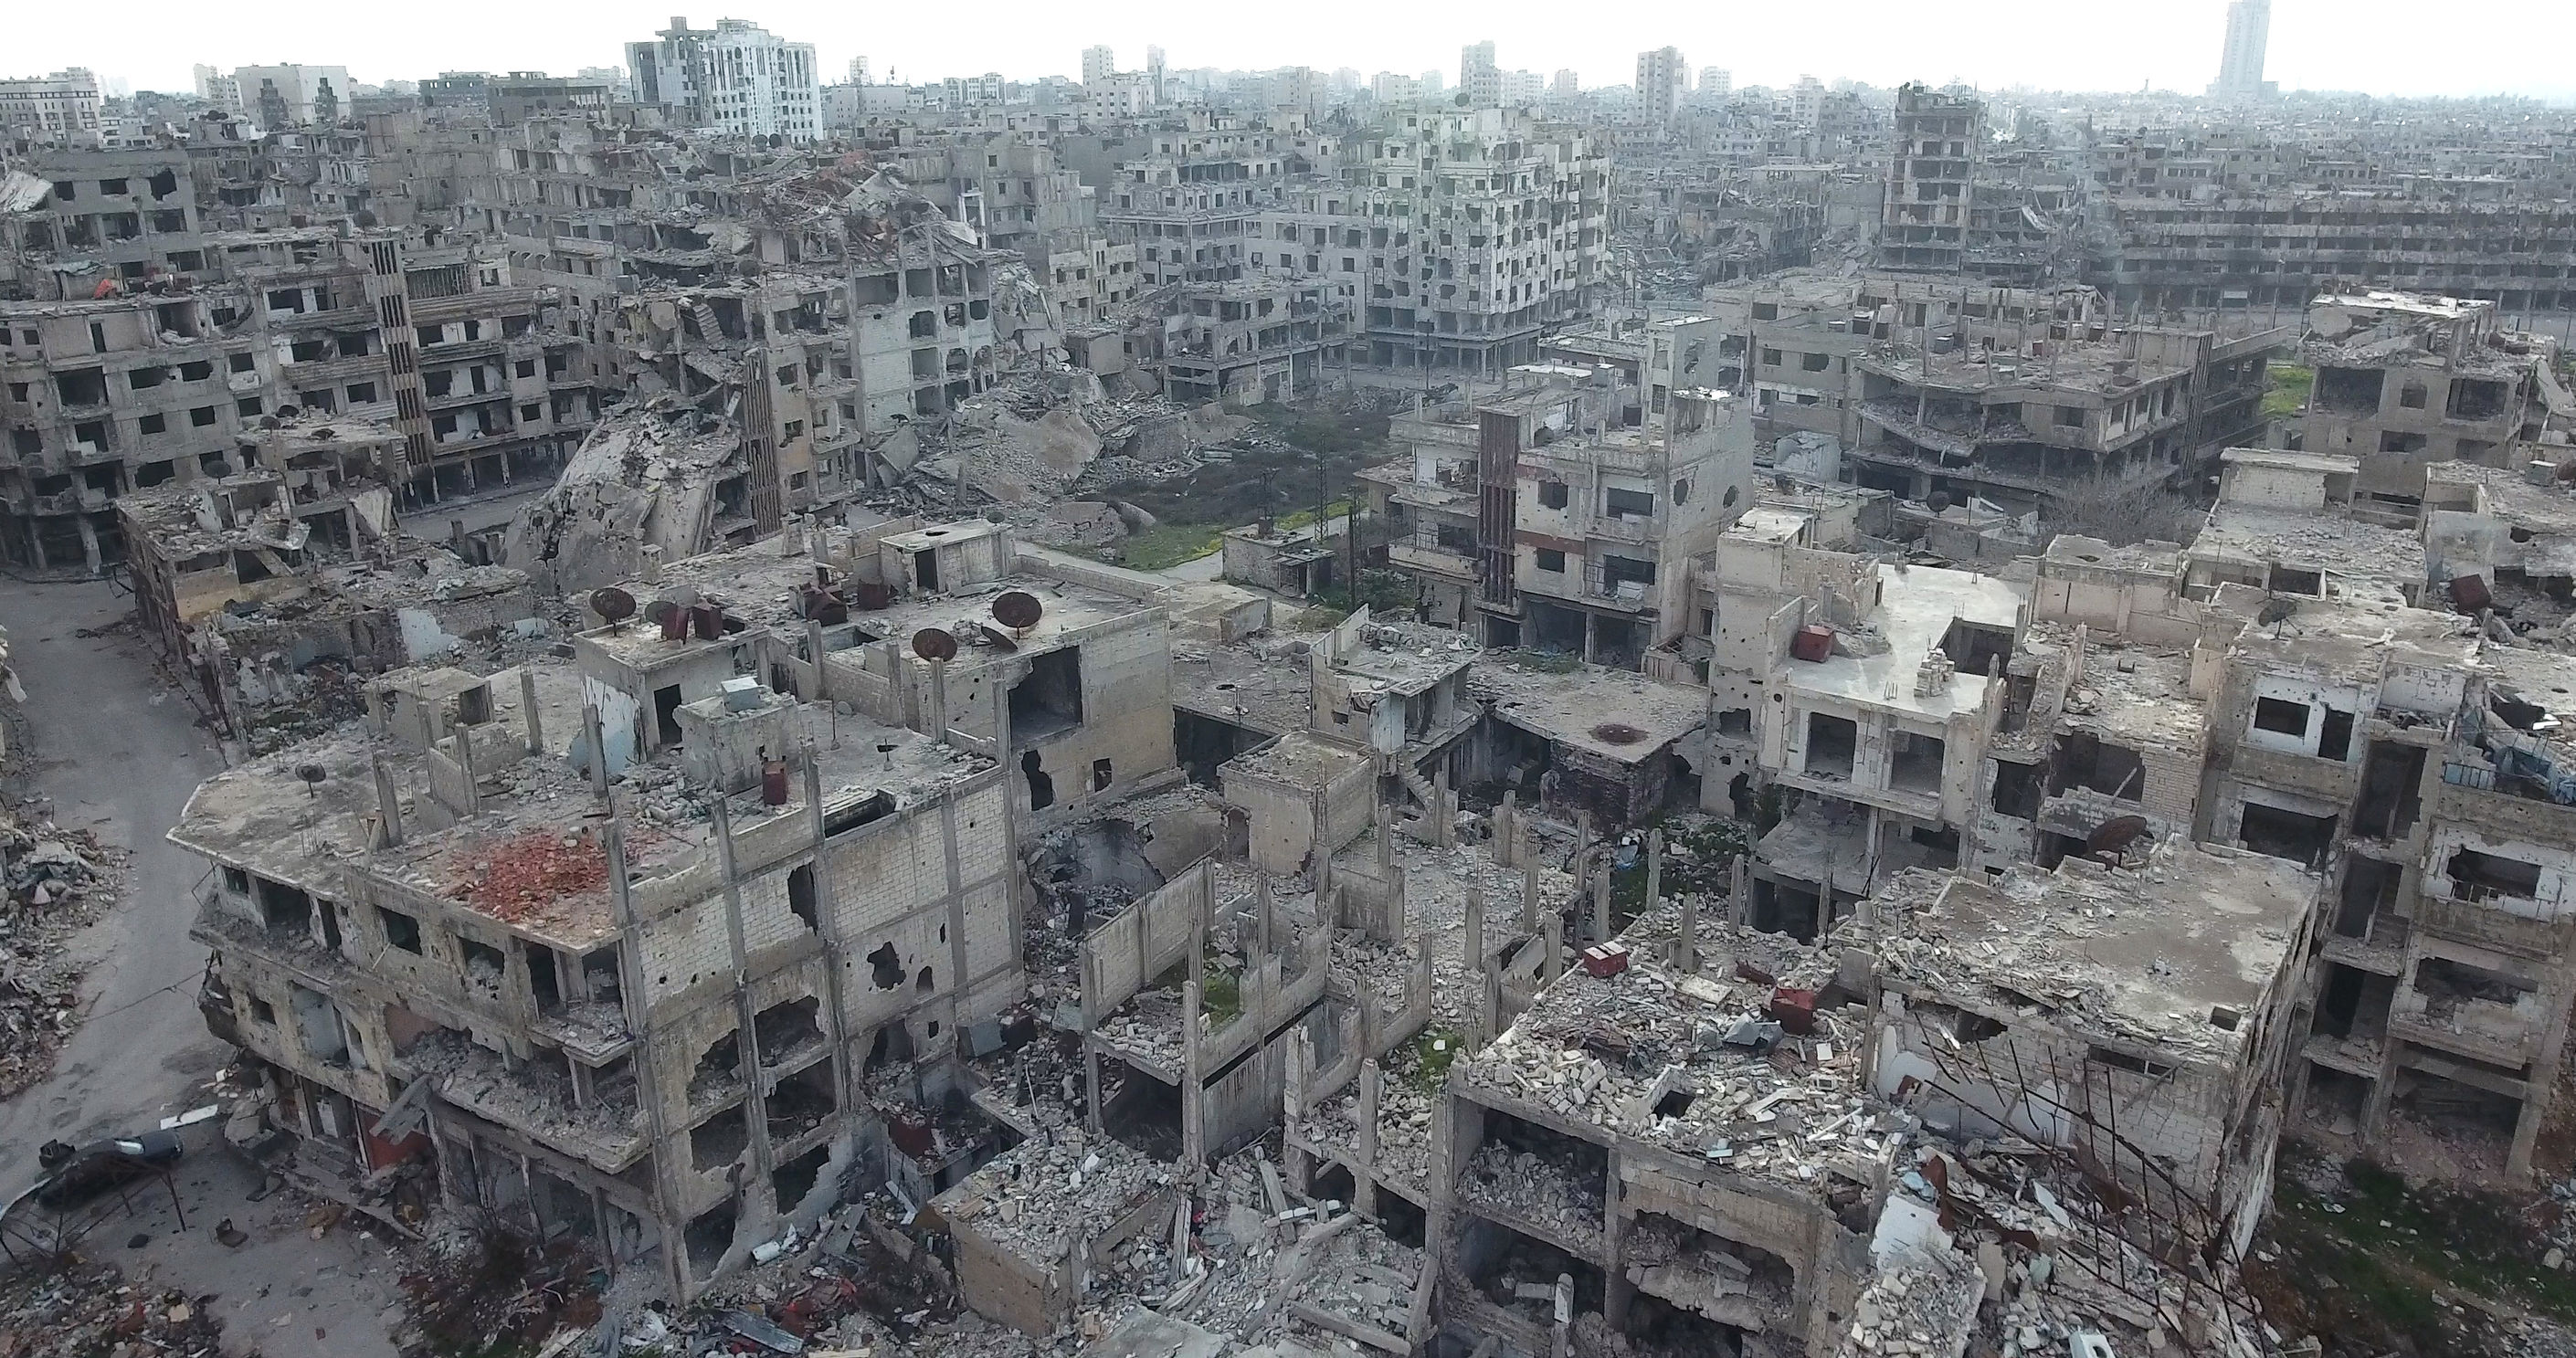 The destroyed city of Homs